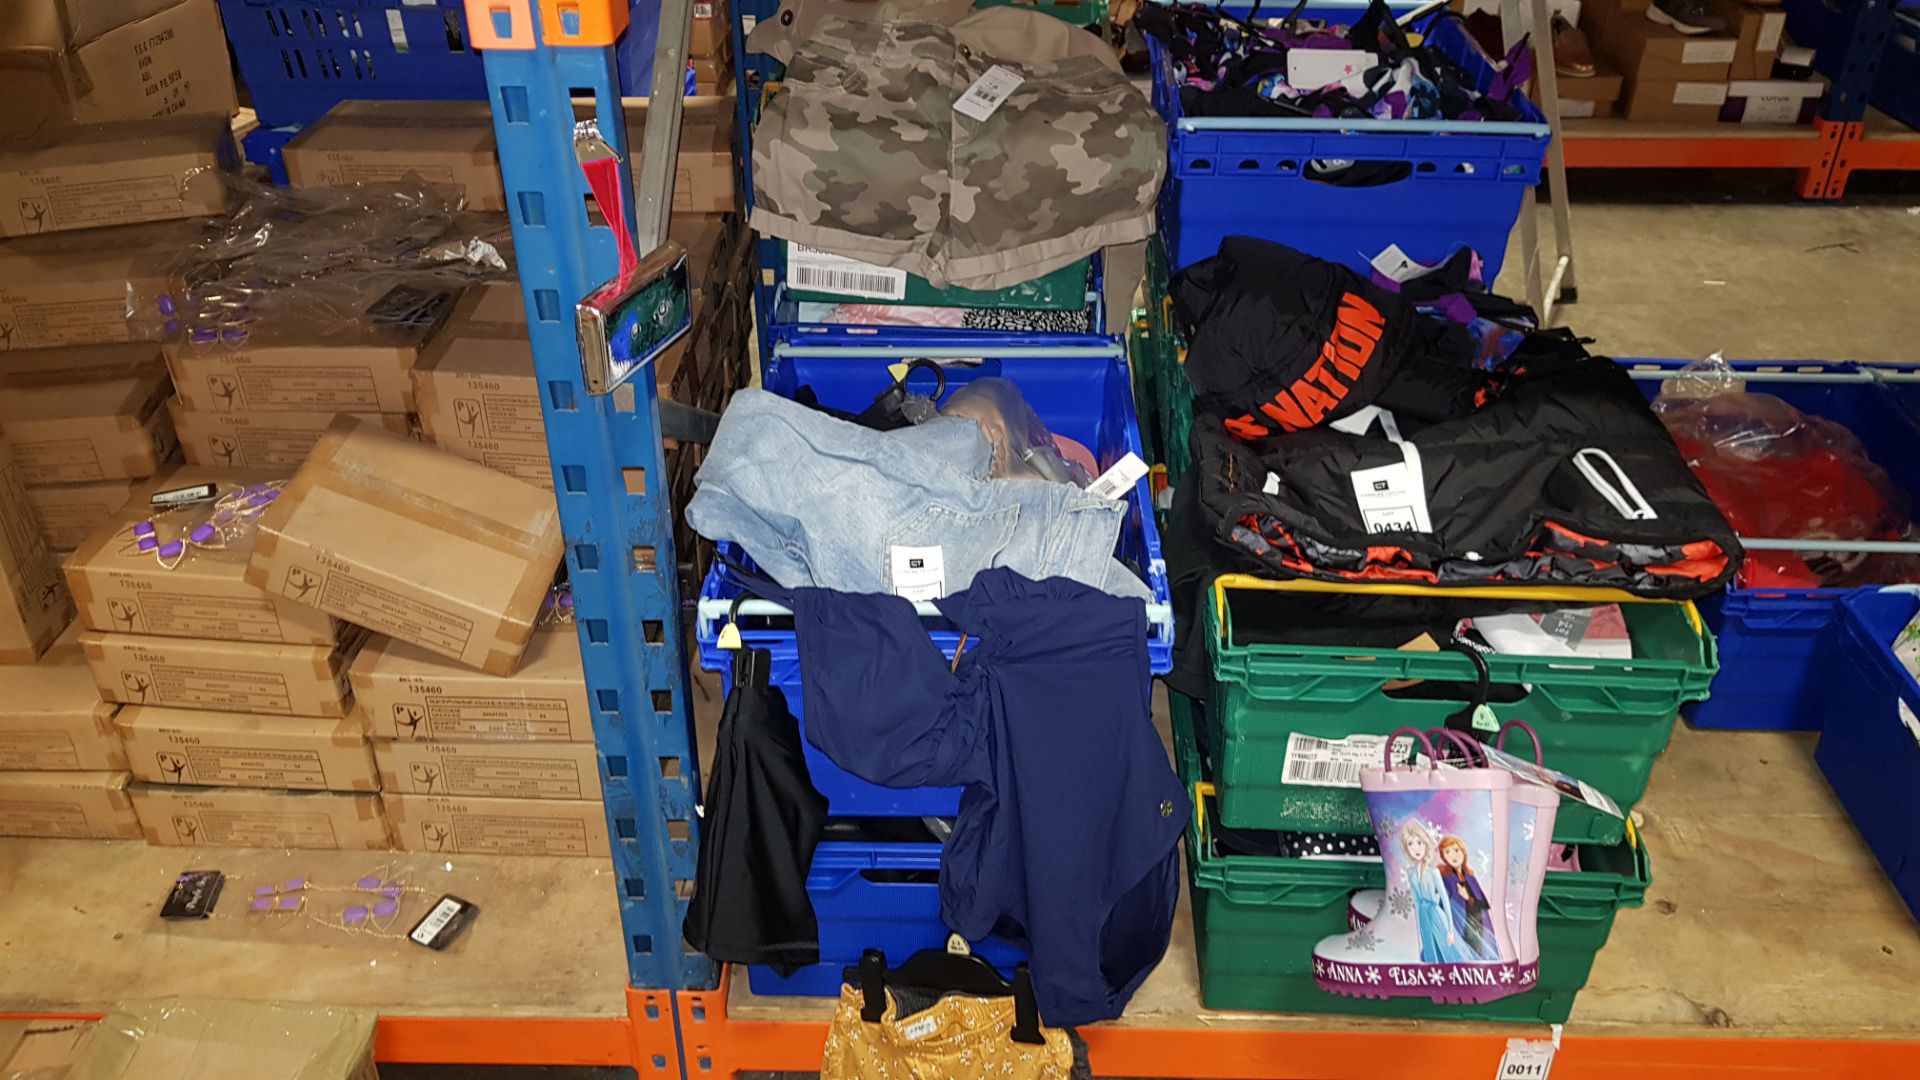 £500 MIN RETAIL PRICED BRAND NEW CHILDRENS CLOTHING IN VARIOUS AGES - NOTE SIMPLE MAGNETIC